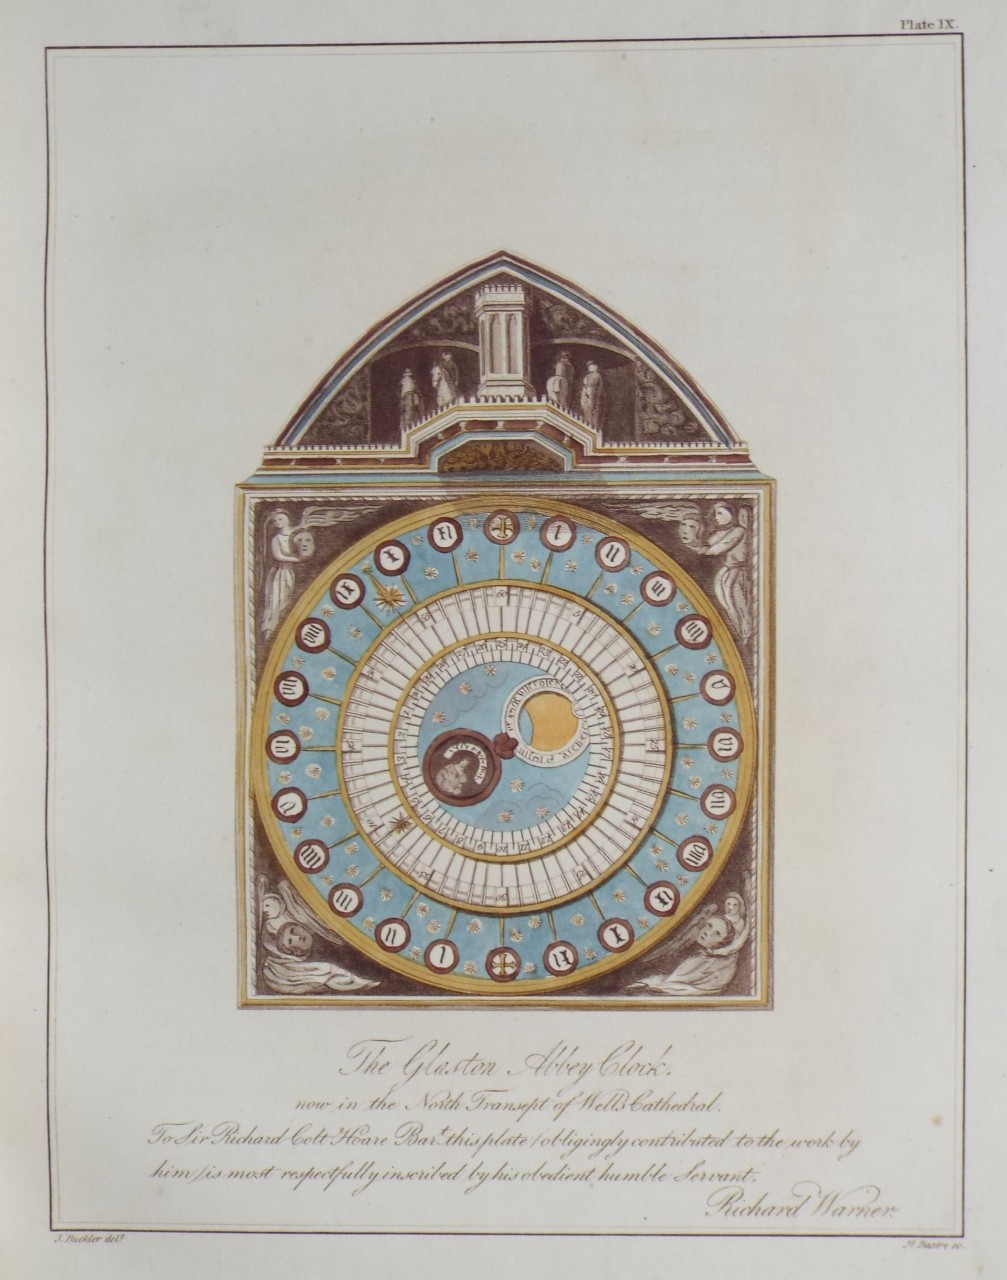 Print - The Glaston Abbey Clock, now in the Nort Transept of Wells Cathedral. - Basire